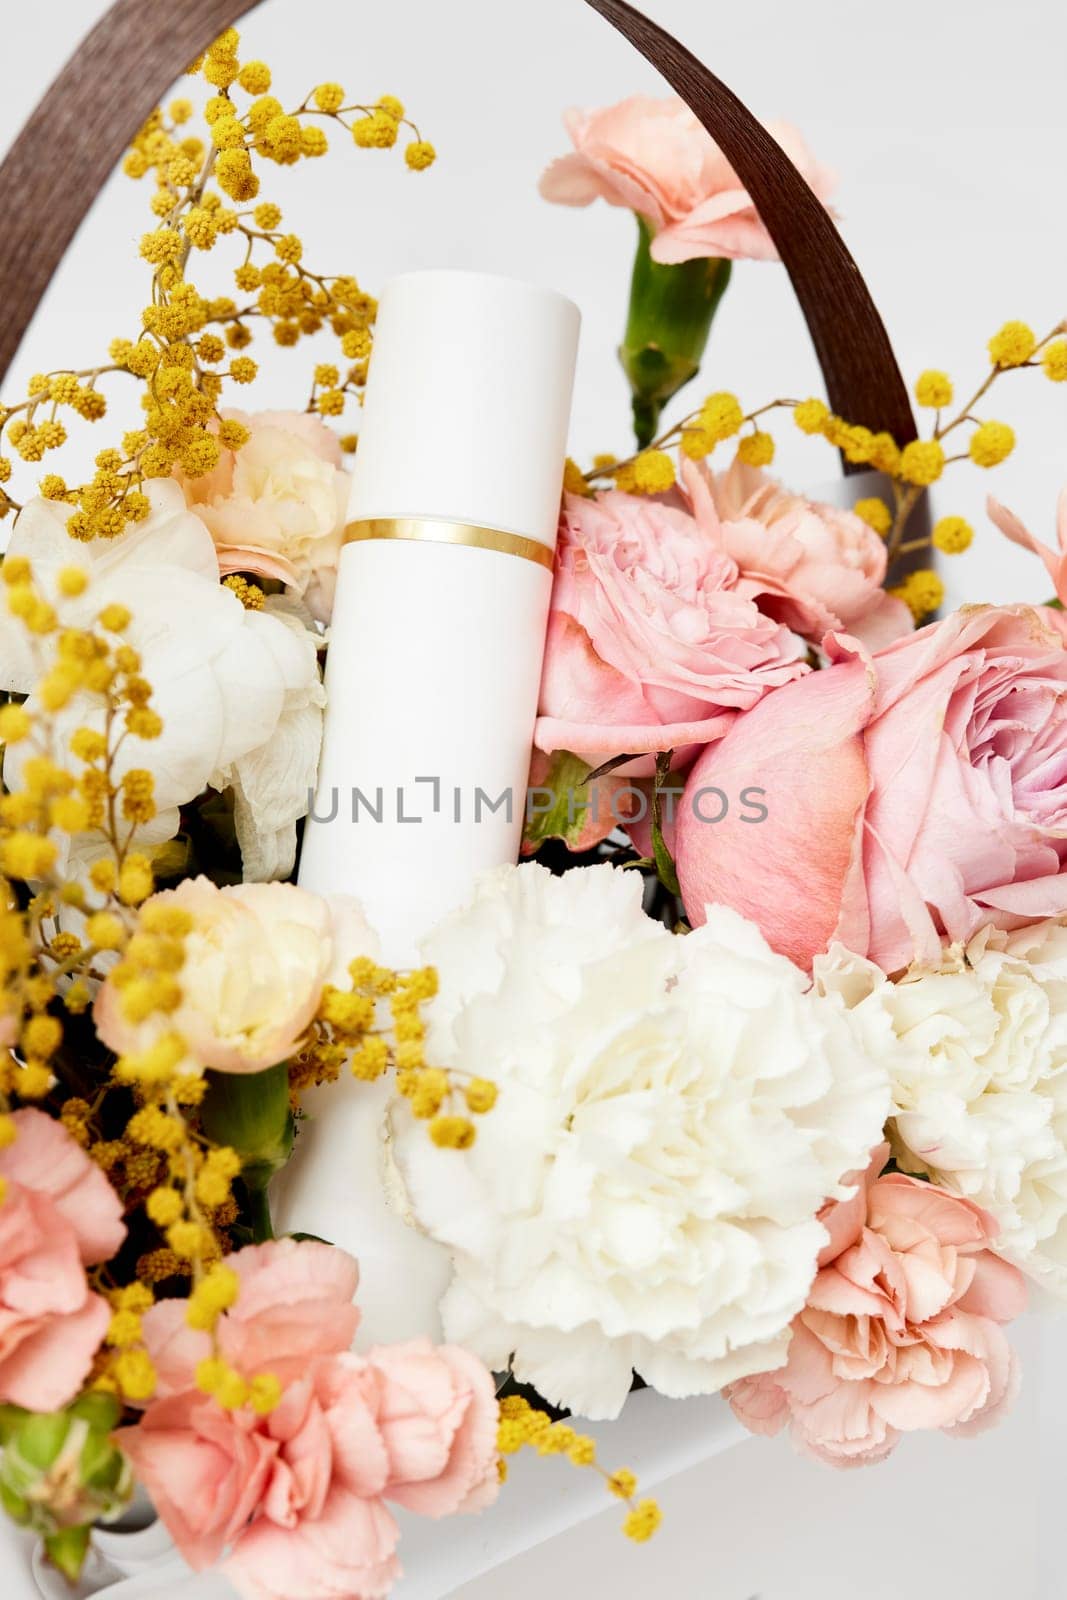 cosmetic bottle mockup with natural ingredient and blooming pink flowers. Natural organic beauty product